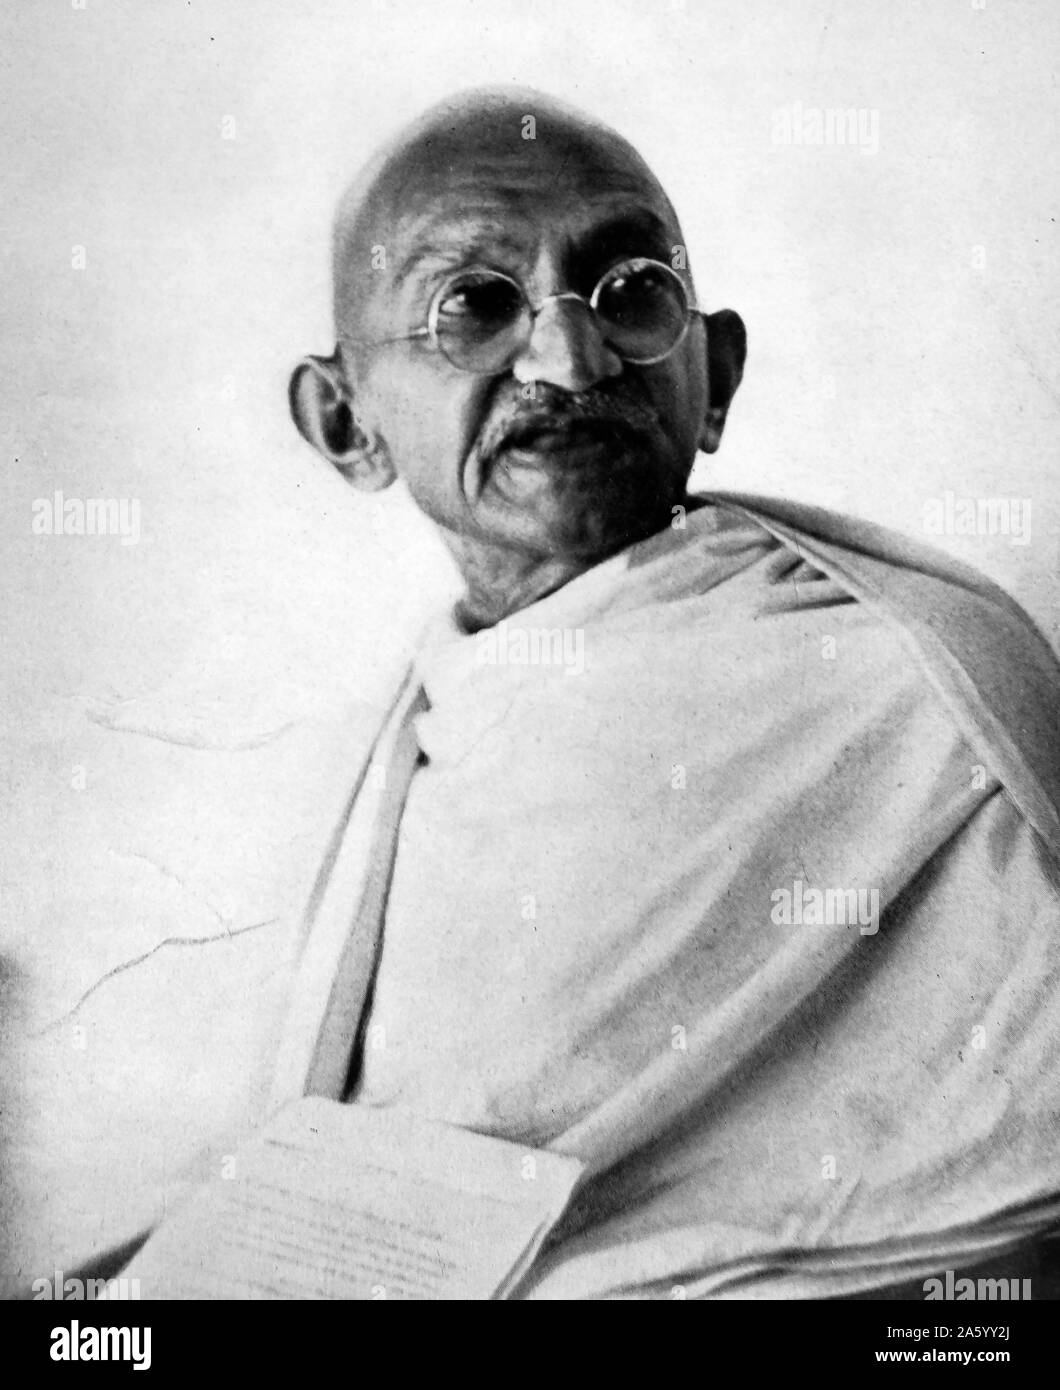 Mohandas Karamchand Gandhi (1869 – 1948), the preeminent leader of the Indian independence movement in British-ruled India. Employing nonviolent civil disobedience, Gandhi led India to independence and inspired movements for civil rights and freedom across the world. Stock Photo